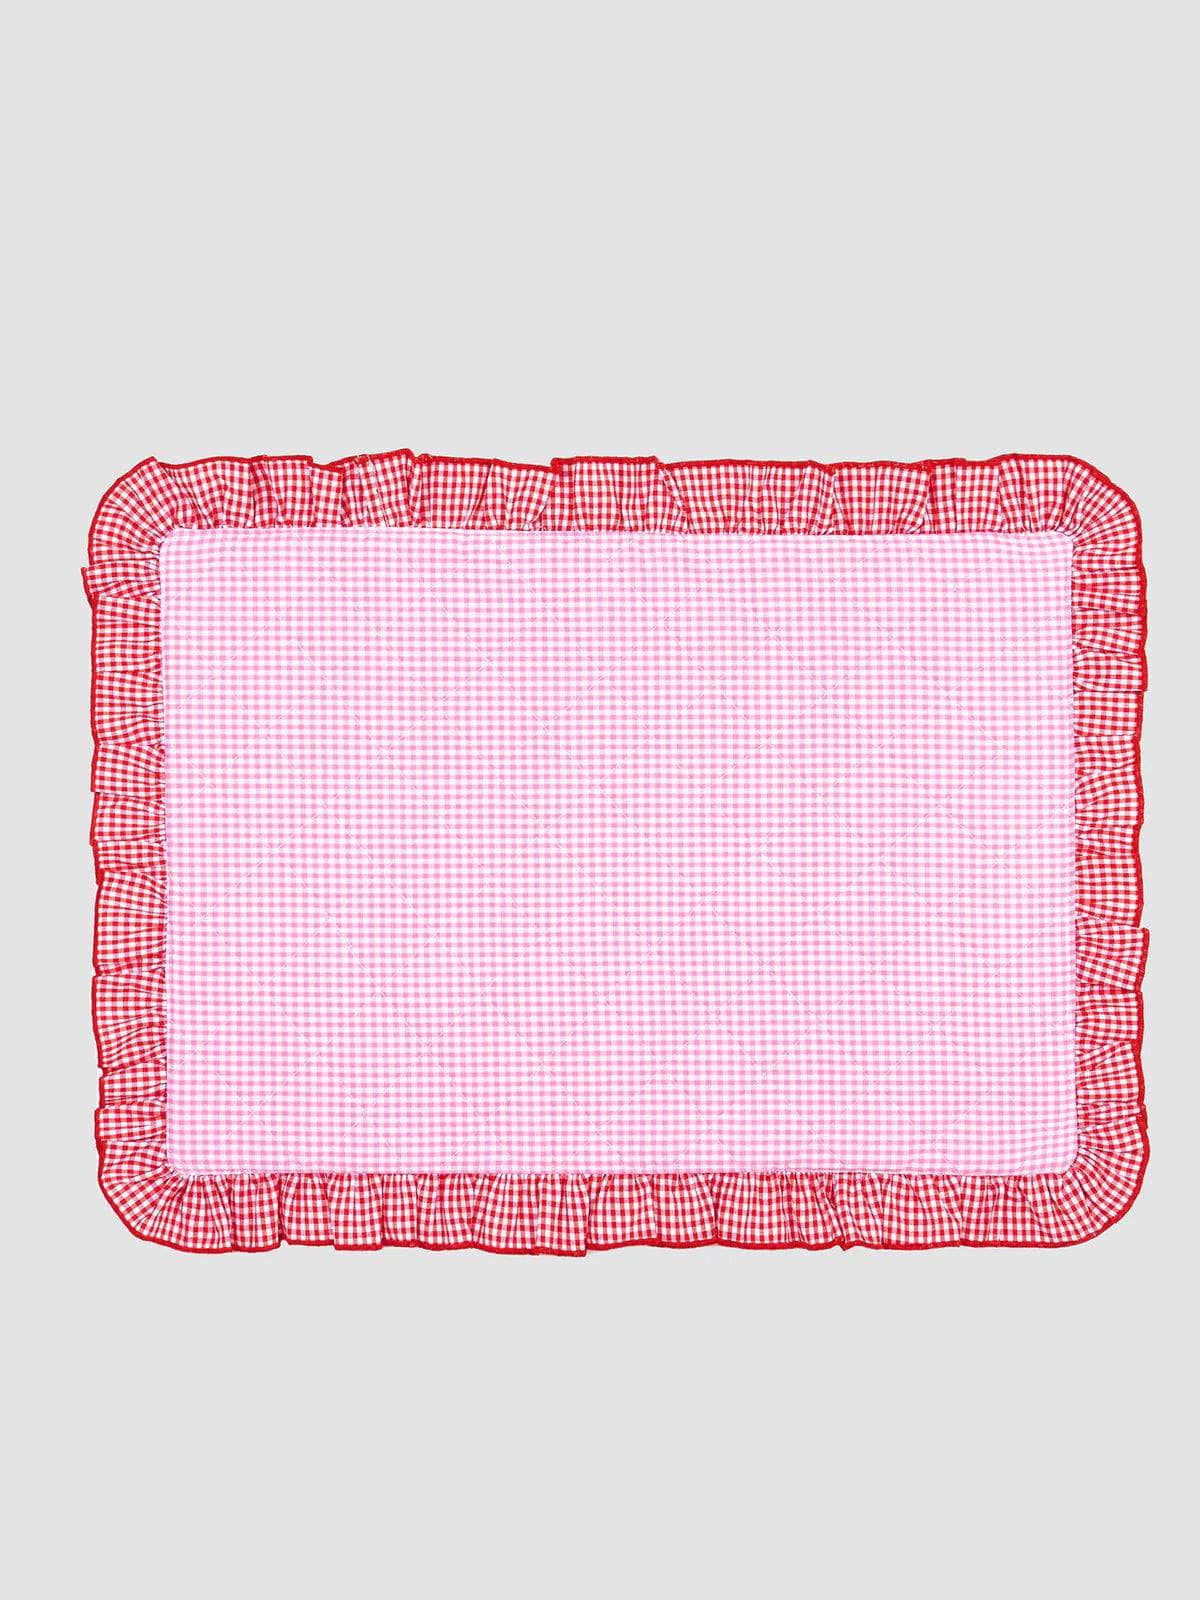 Picnic Gingham Placemat Pink